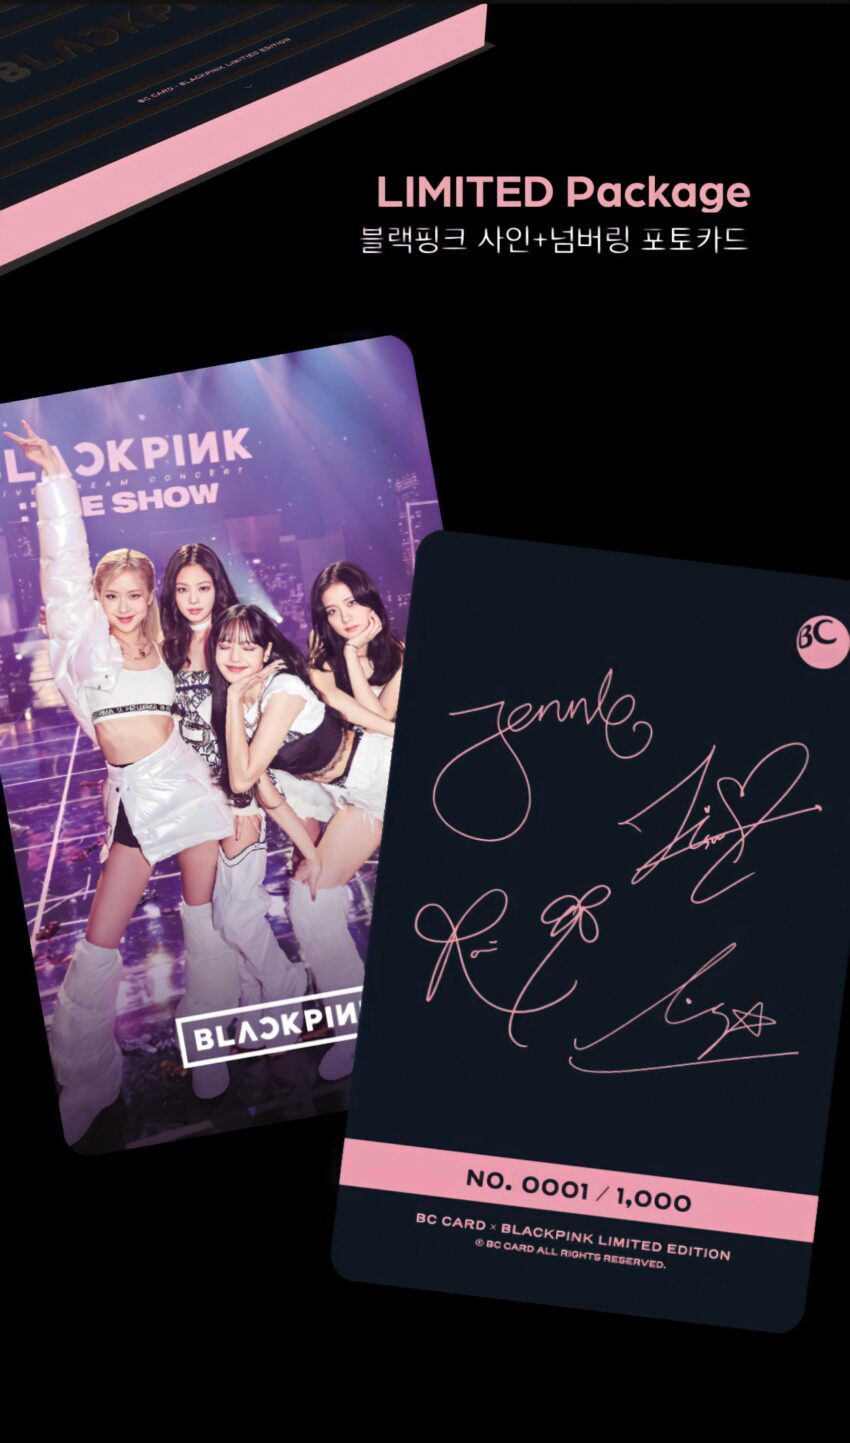 BLACKPINK credit cards are so cool!